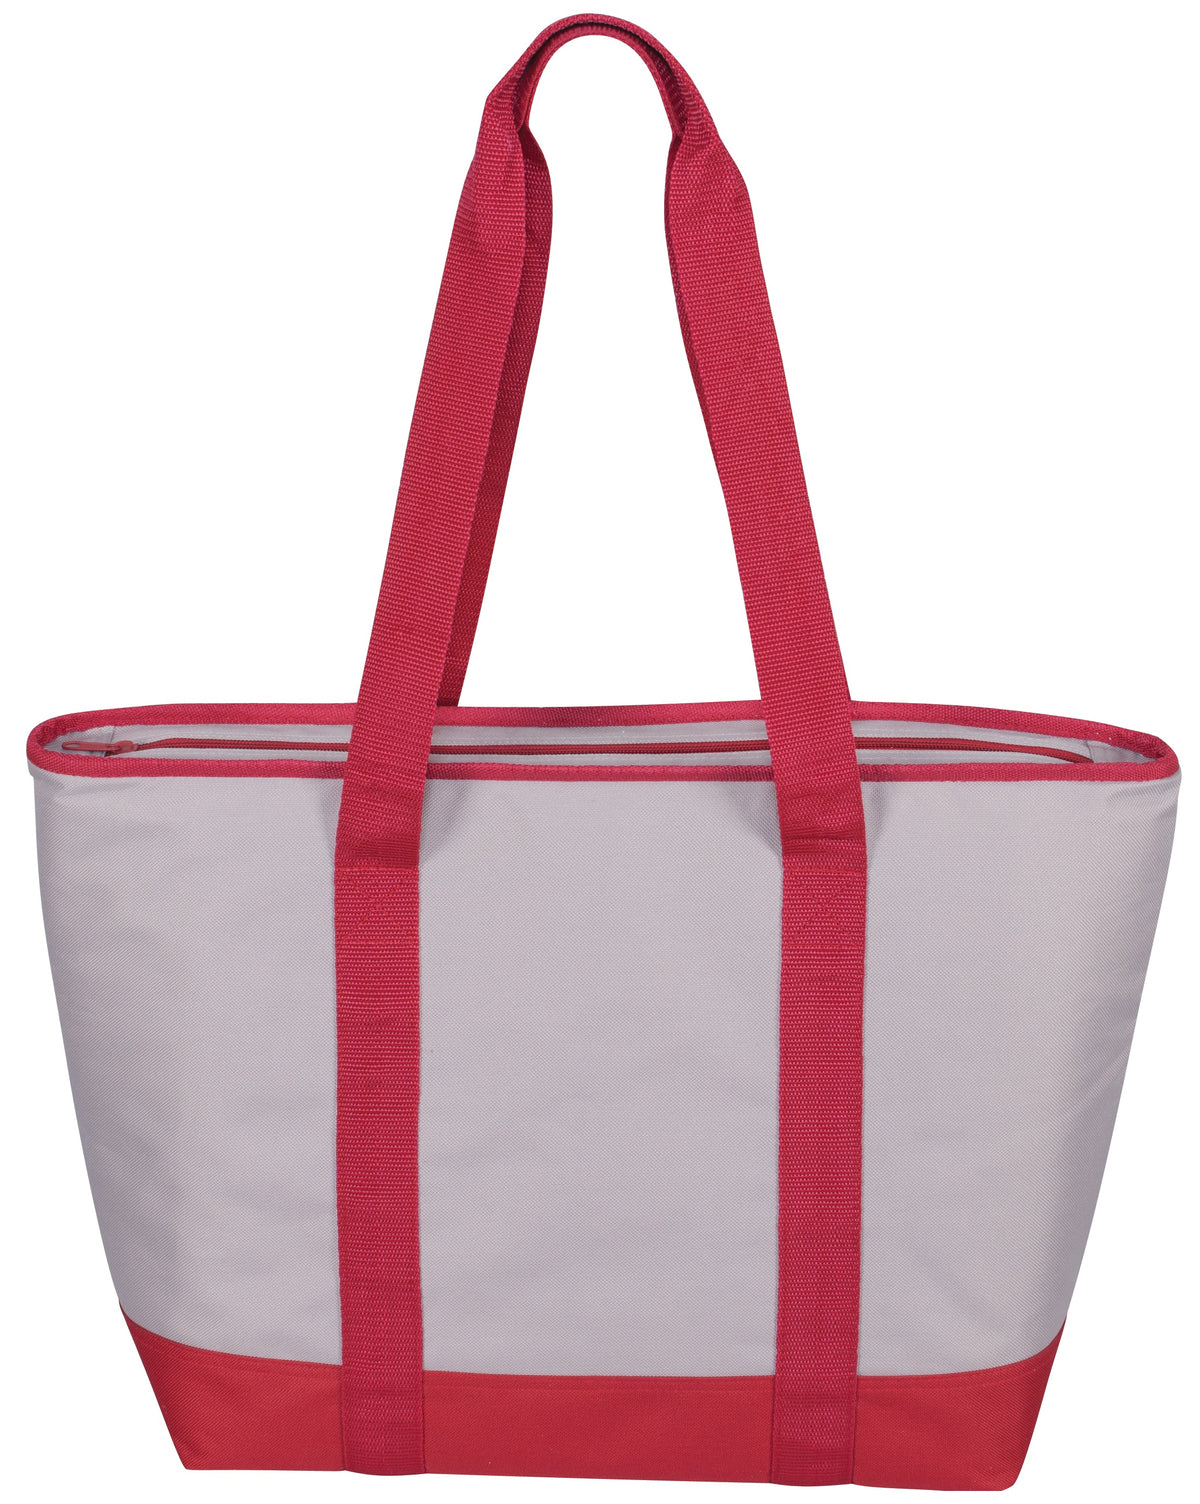 Harold Import 02983RD Insulated Tote, Red